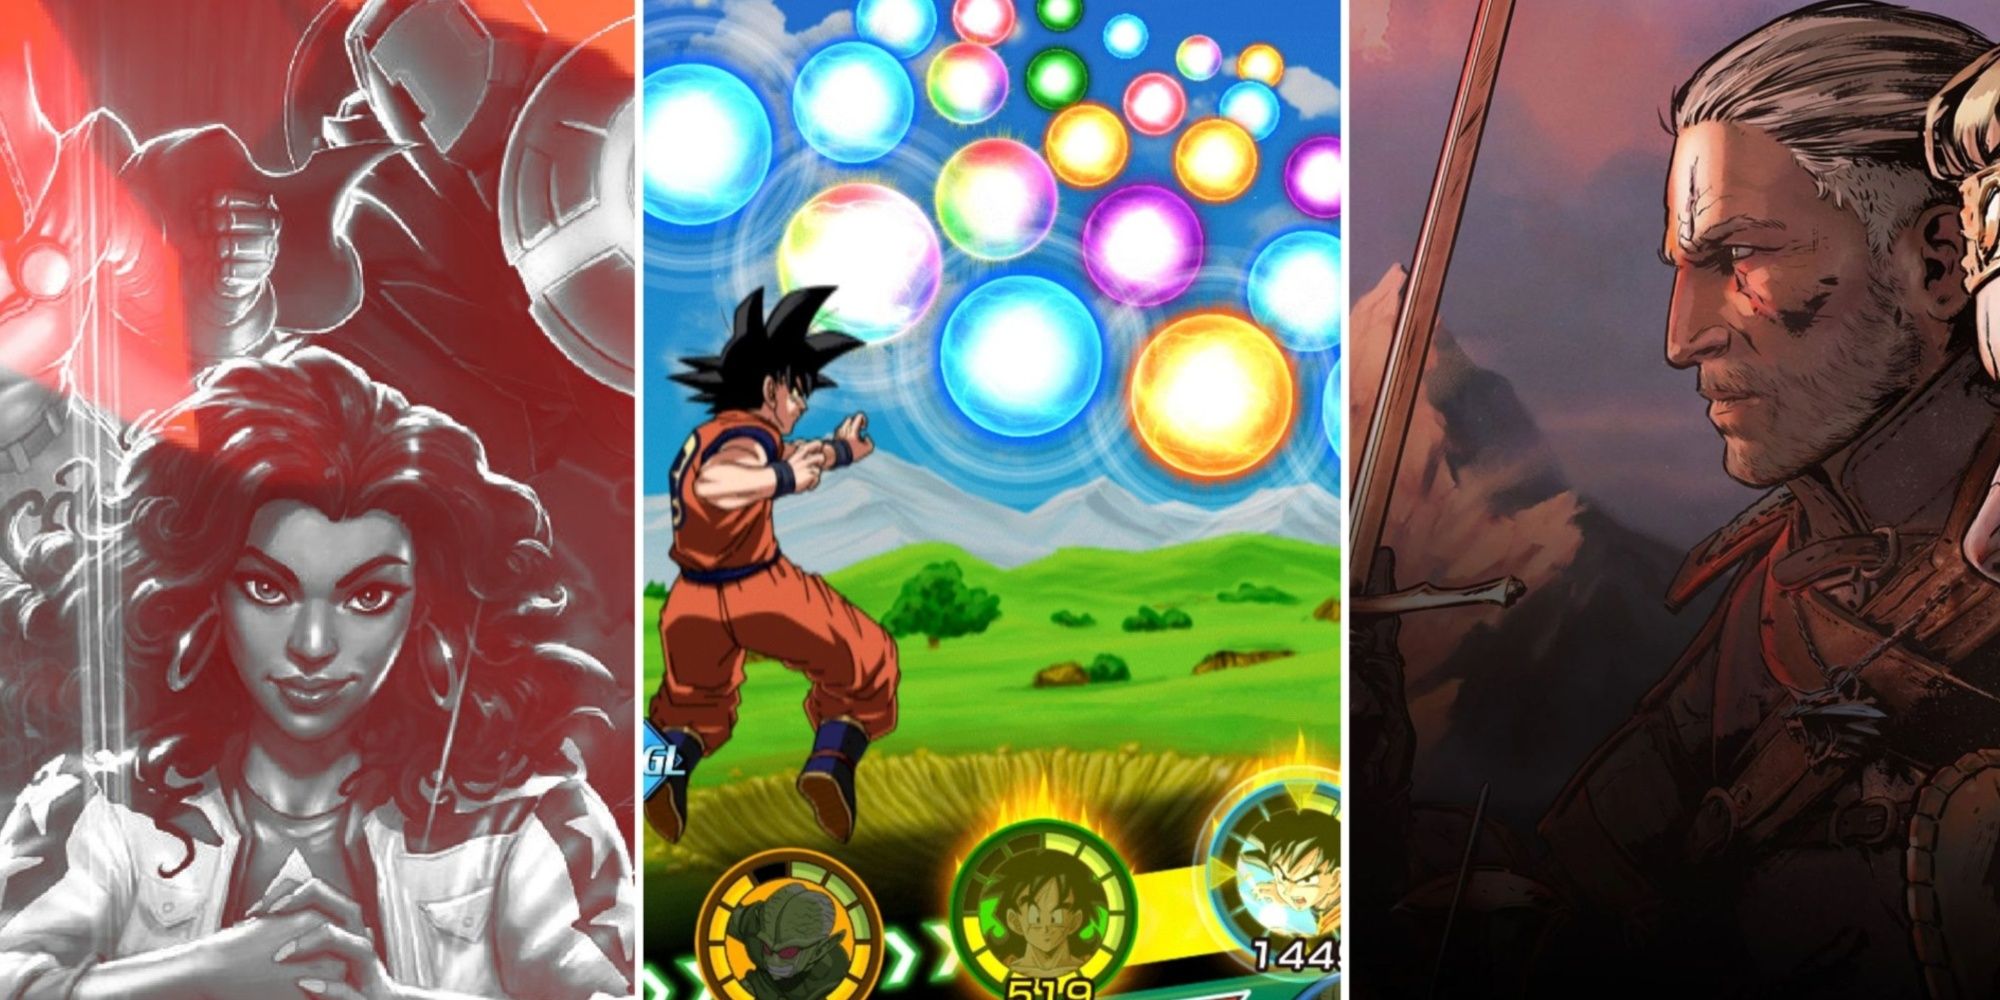 A collage showing Geralt, Goku, and another character from card games.